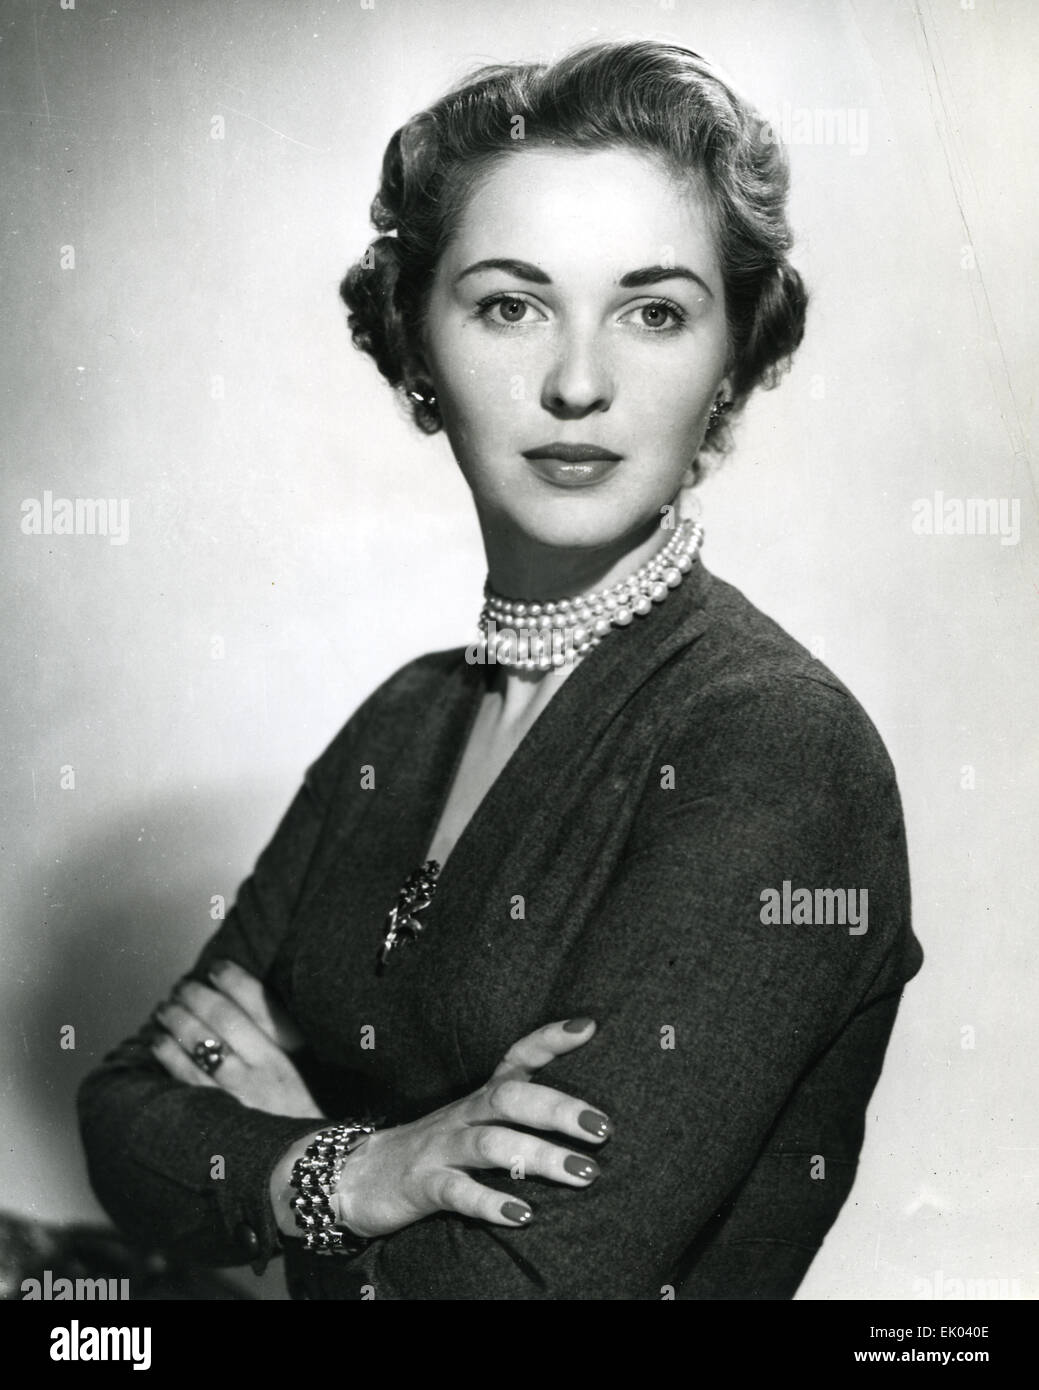 KATIE BOYLE, Lady Saunders. Italian-born English actress and TV personality about 1950. Photo Eric Coop Stock Photo